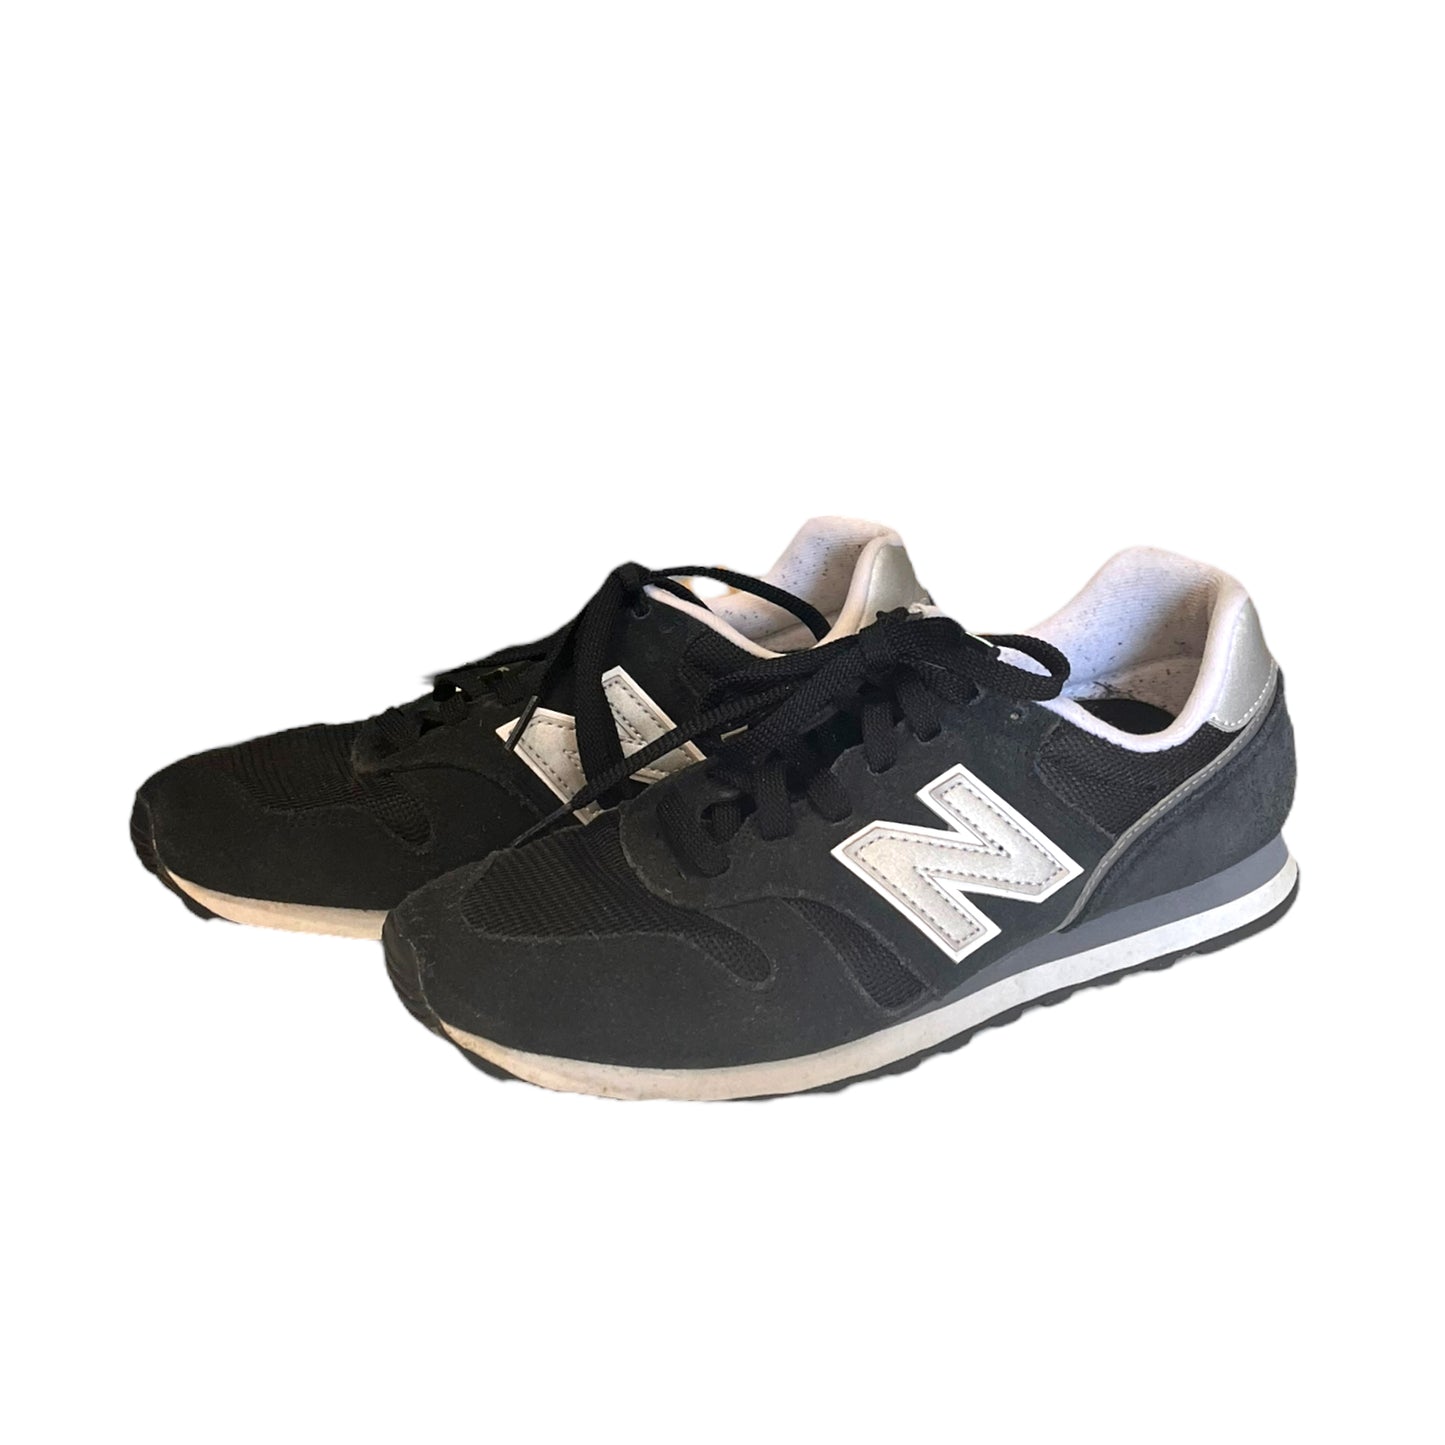 New Balance Black Suede Trainers